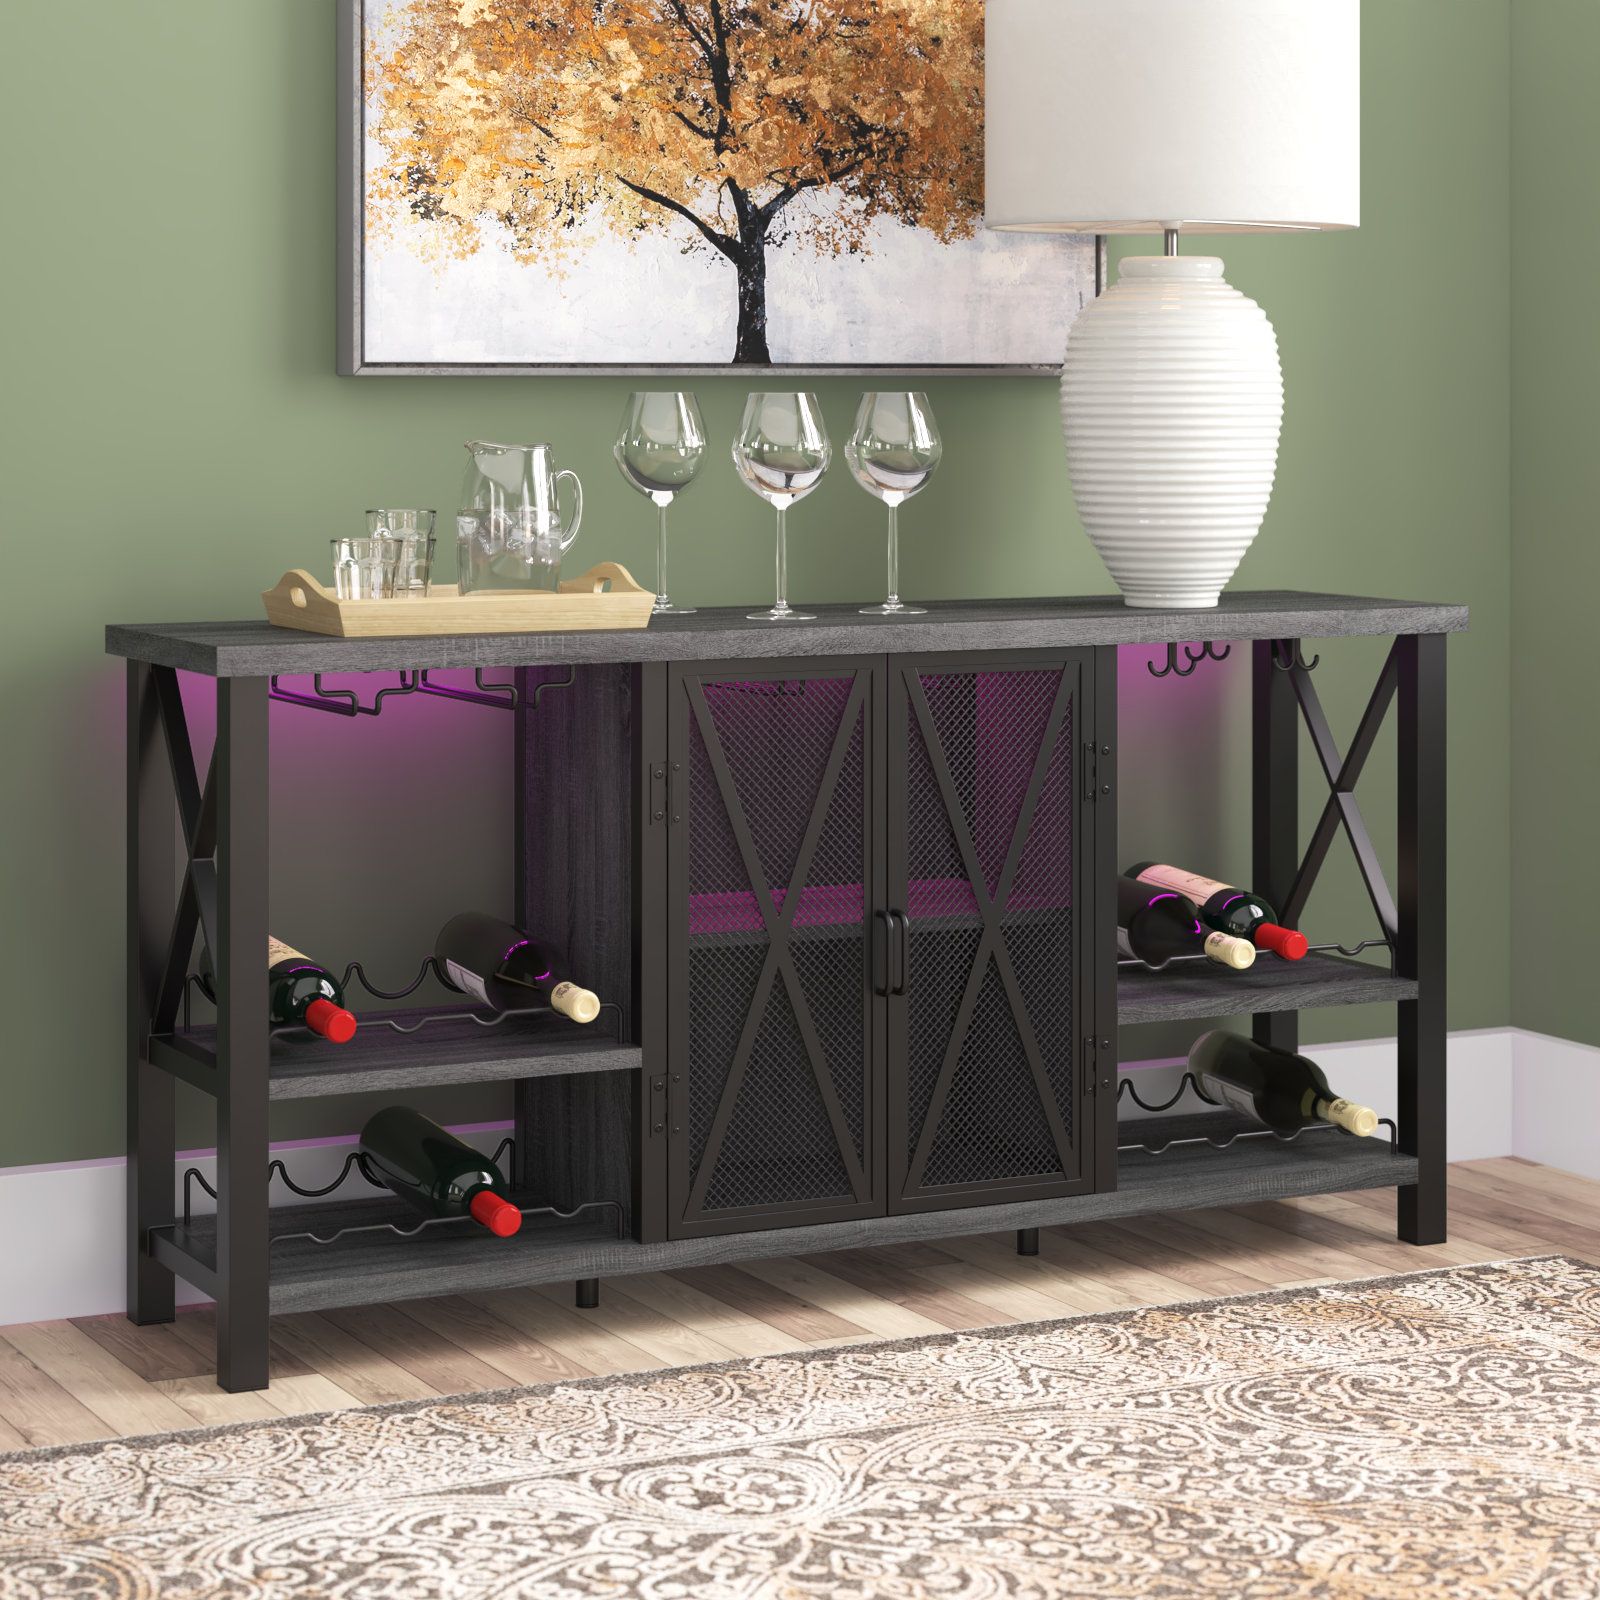 Wade Logan® Sideboard With Led Light And Wine Cabinet & Reviews | Wayfair Within Latest Sideboards With Breathable Mesh Doors (View 8 of 15)